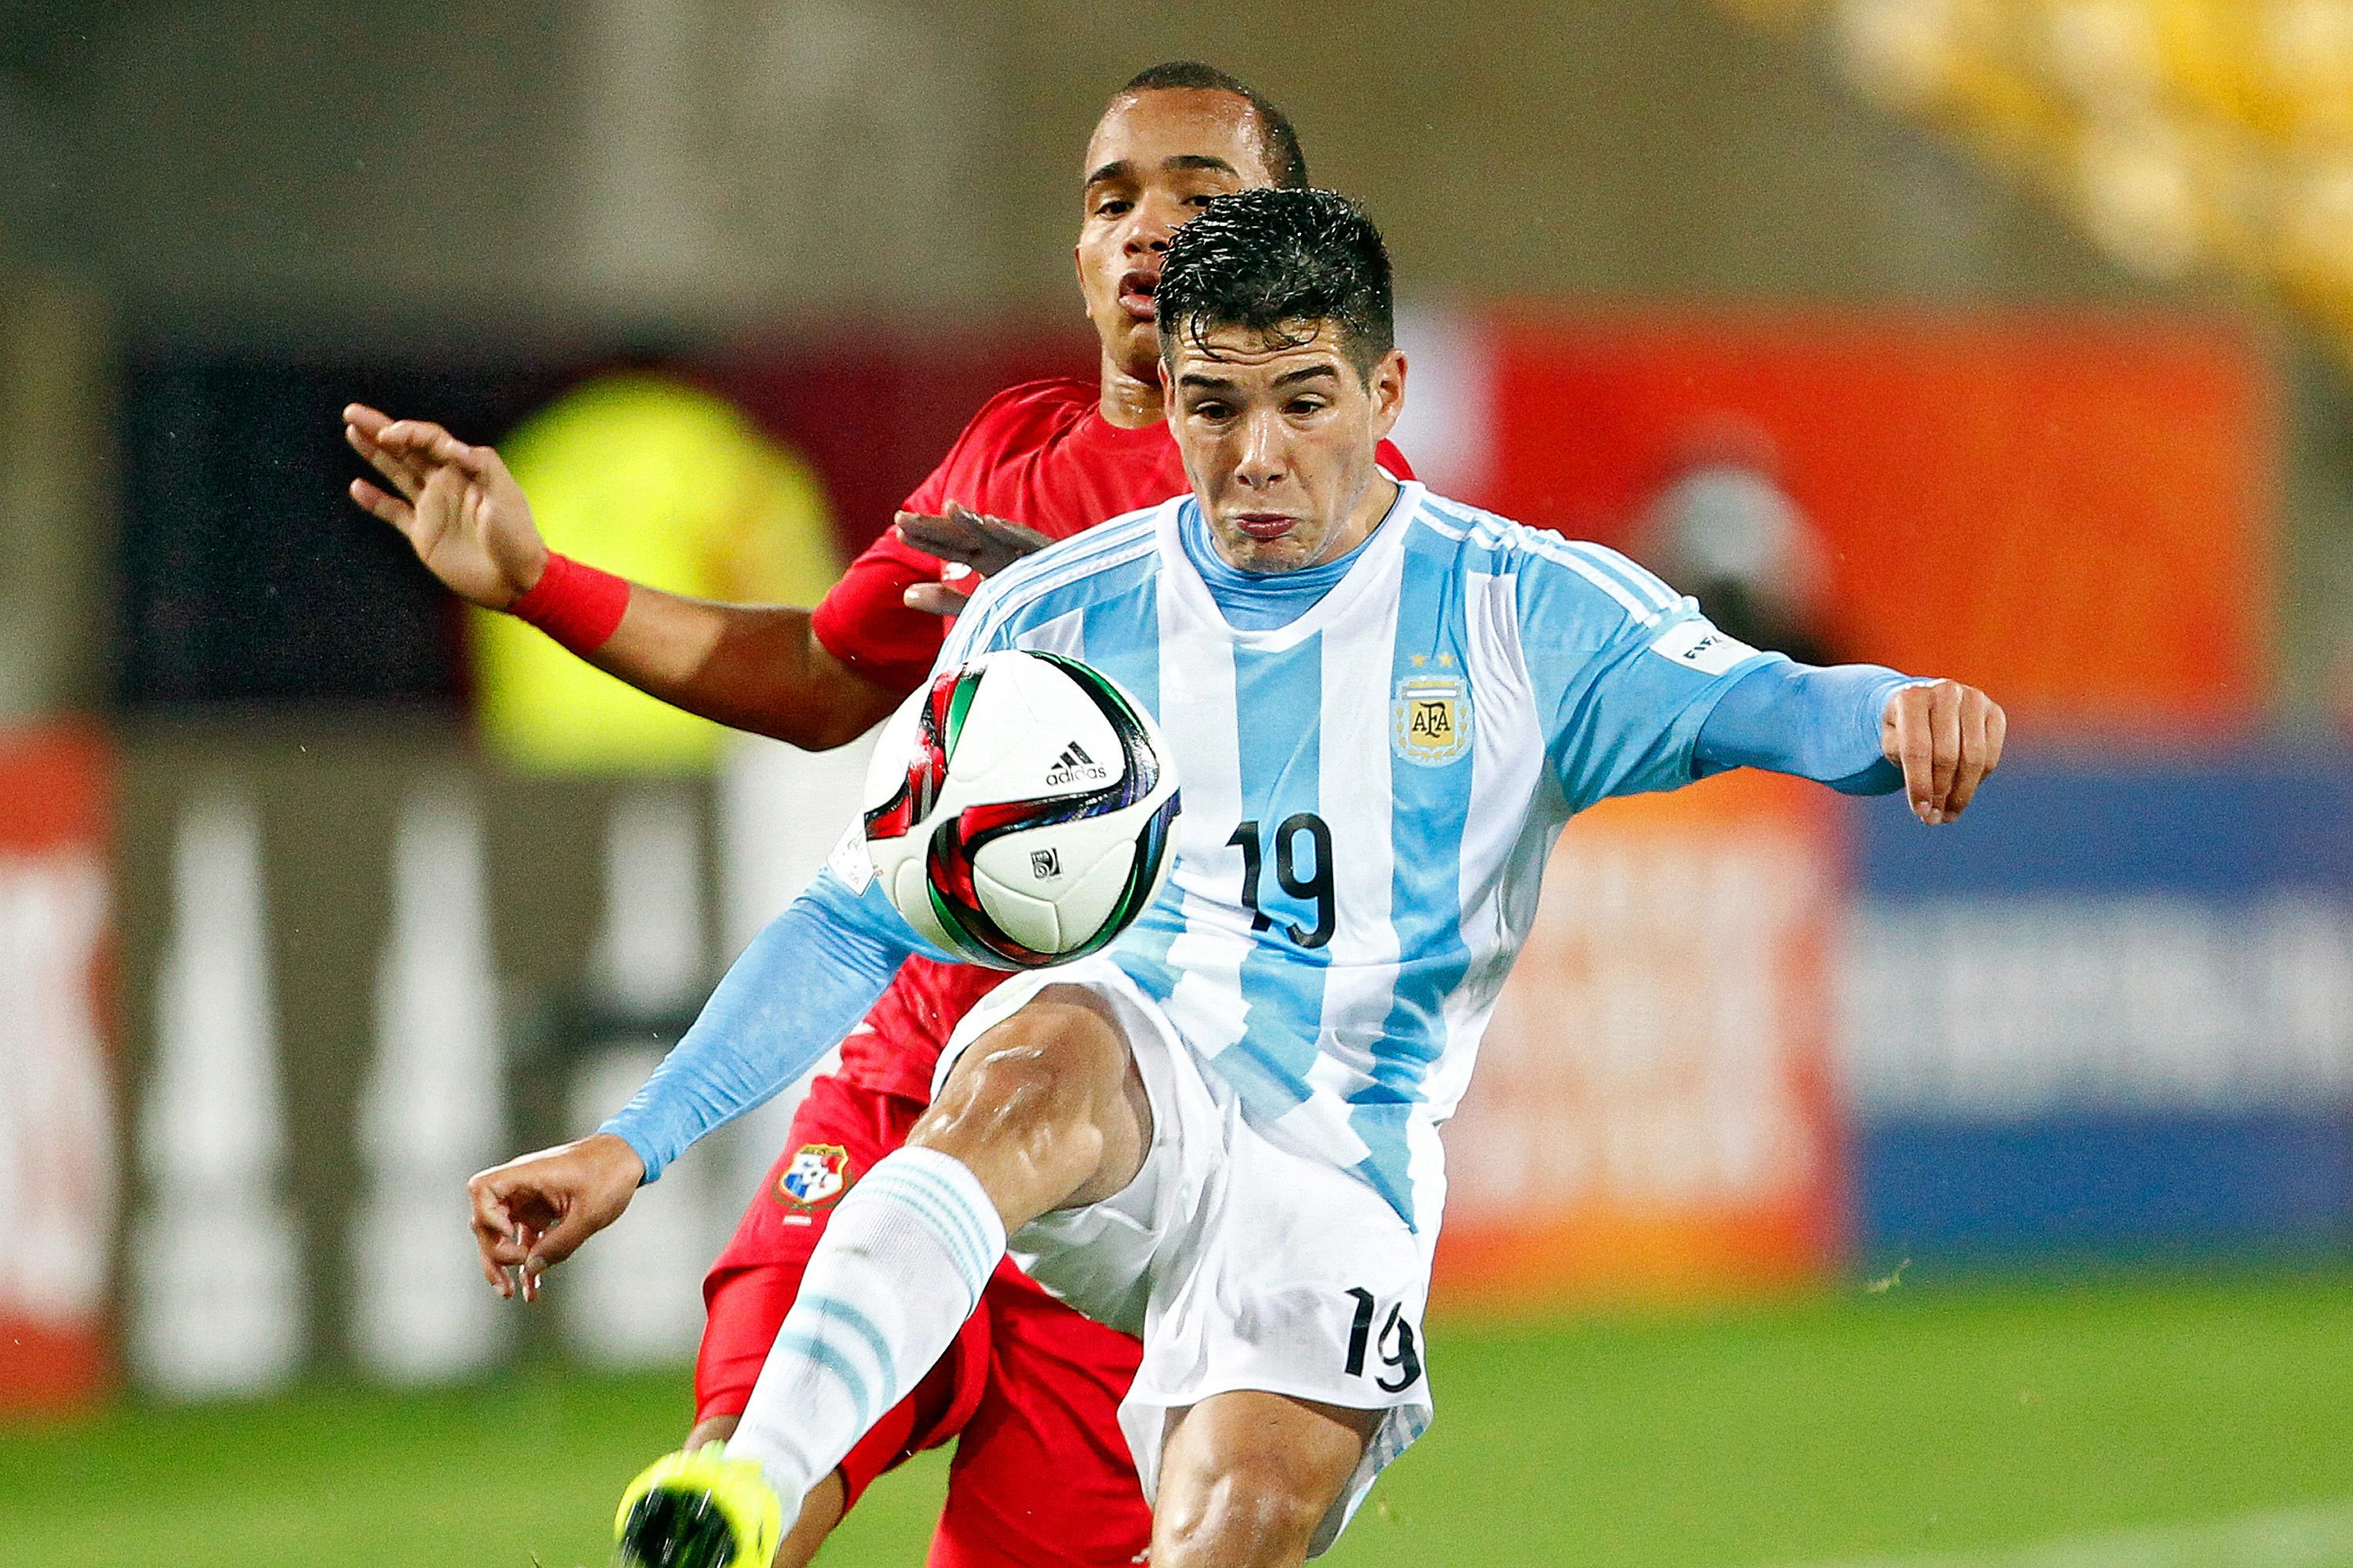 epa04775024 Emiliano Buendia (R) of Argentina in action against Jesus Gonzalez (L) of Panama during the FIFA Under-20 World Cup 2015 group B soccer match between Argentina and Panama in Wellington, New Zealand, 30 May 2015. The match ended 2-2.  EPA/DEAN PEMBERTON EDITORIAL USE ONLY - NOT USED IN ASSOCATION WITH ANY COMMERCIAL ENTITY - IMAGES MUST NOT BE USED IN ANY FORM OF ALERT OR PUSH SERVICE OF ANY KIND INCLUDING VIA MOBILE ALERT SERVICES, DOWNLOADS TO MOBILE DEVICES OR MMS MESSAGING